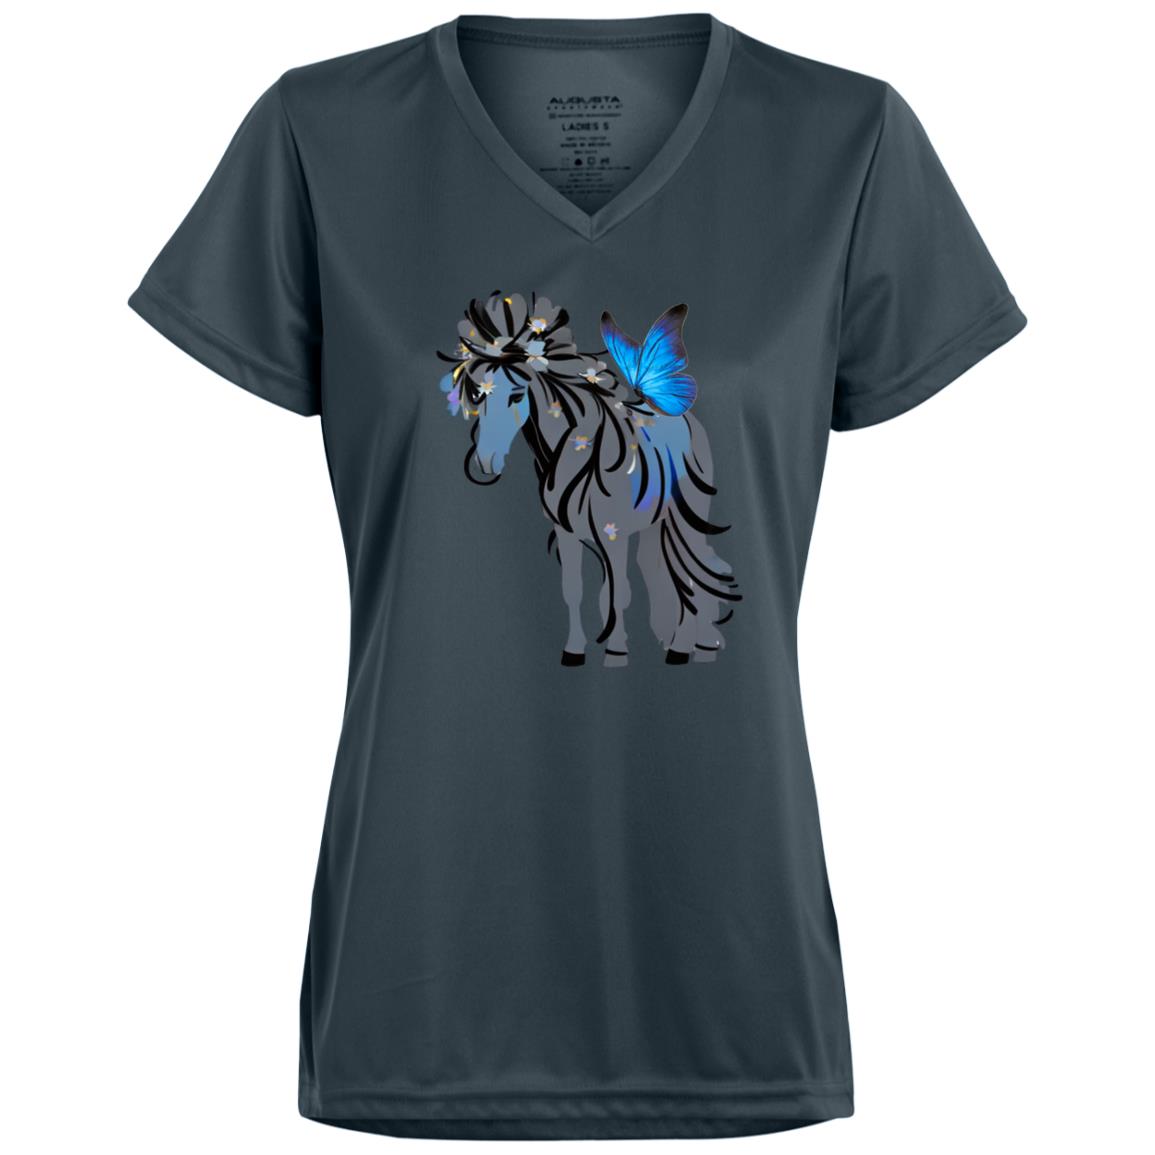 Gussy and the butterfly 1790 Ladies’ Moisture-Wicking V-Neck Tee